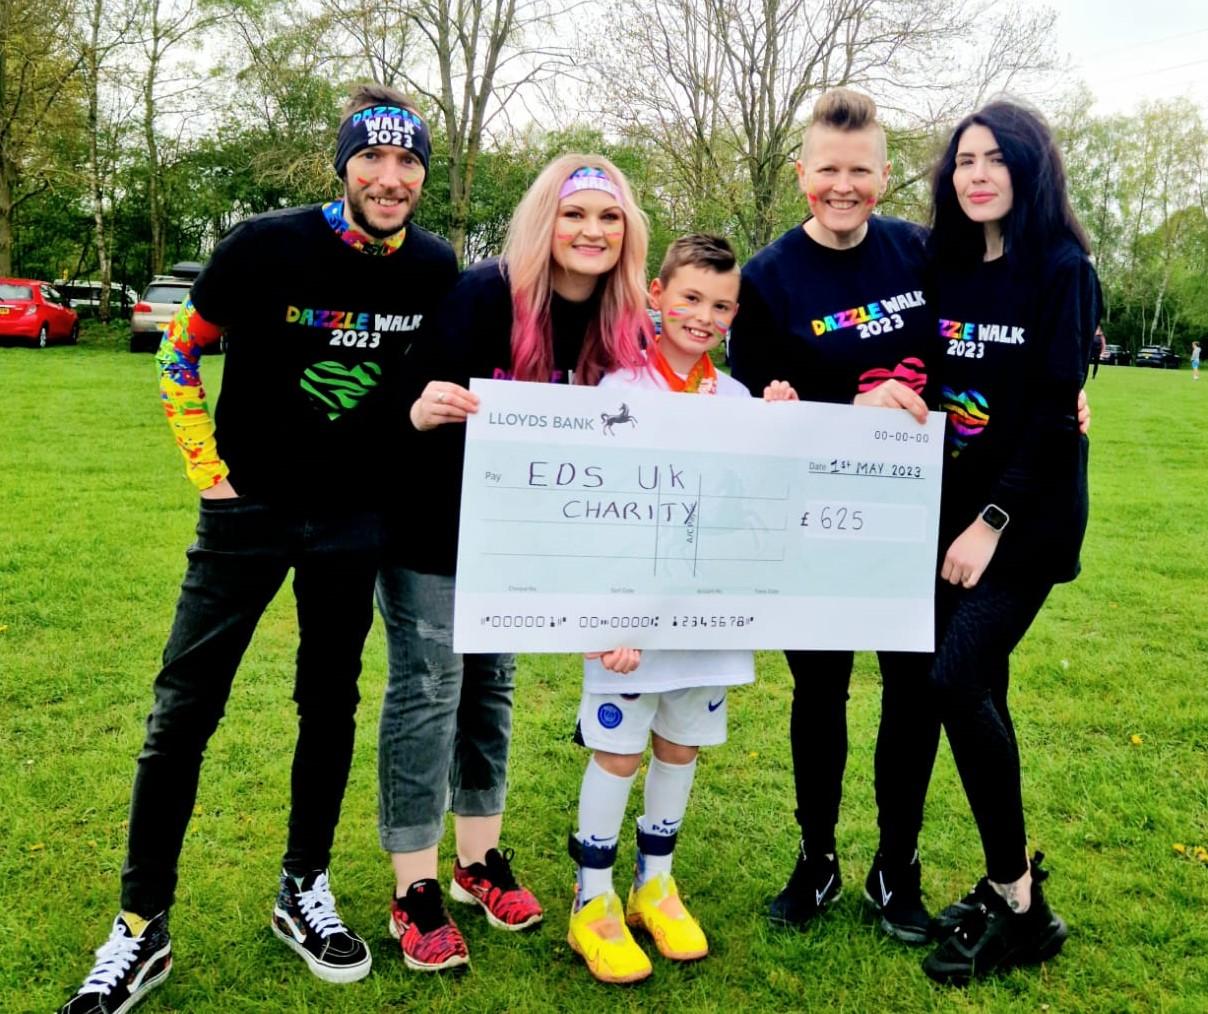 10-year-old Vinnie with friends and family holding a large cheque for £625